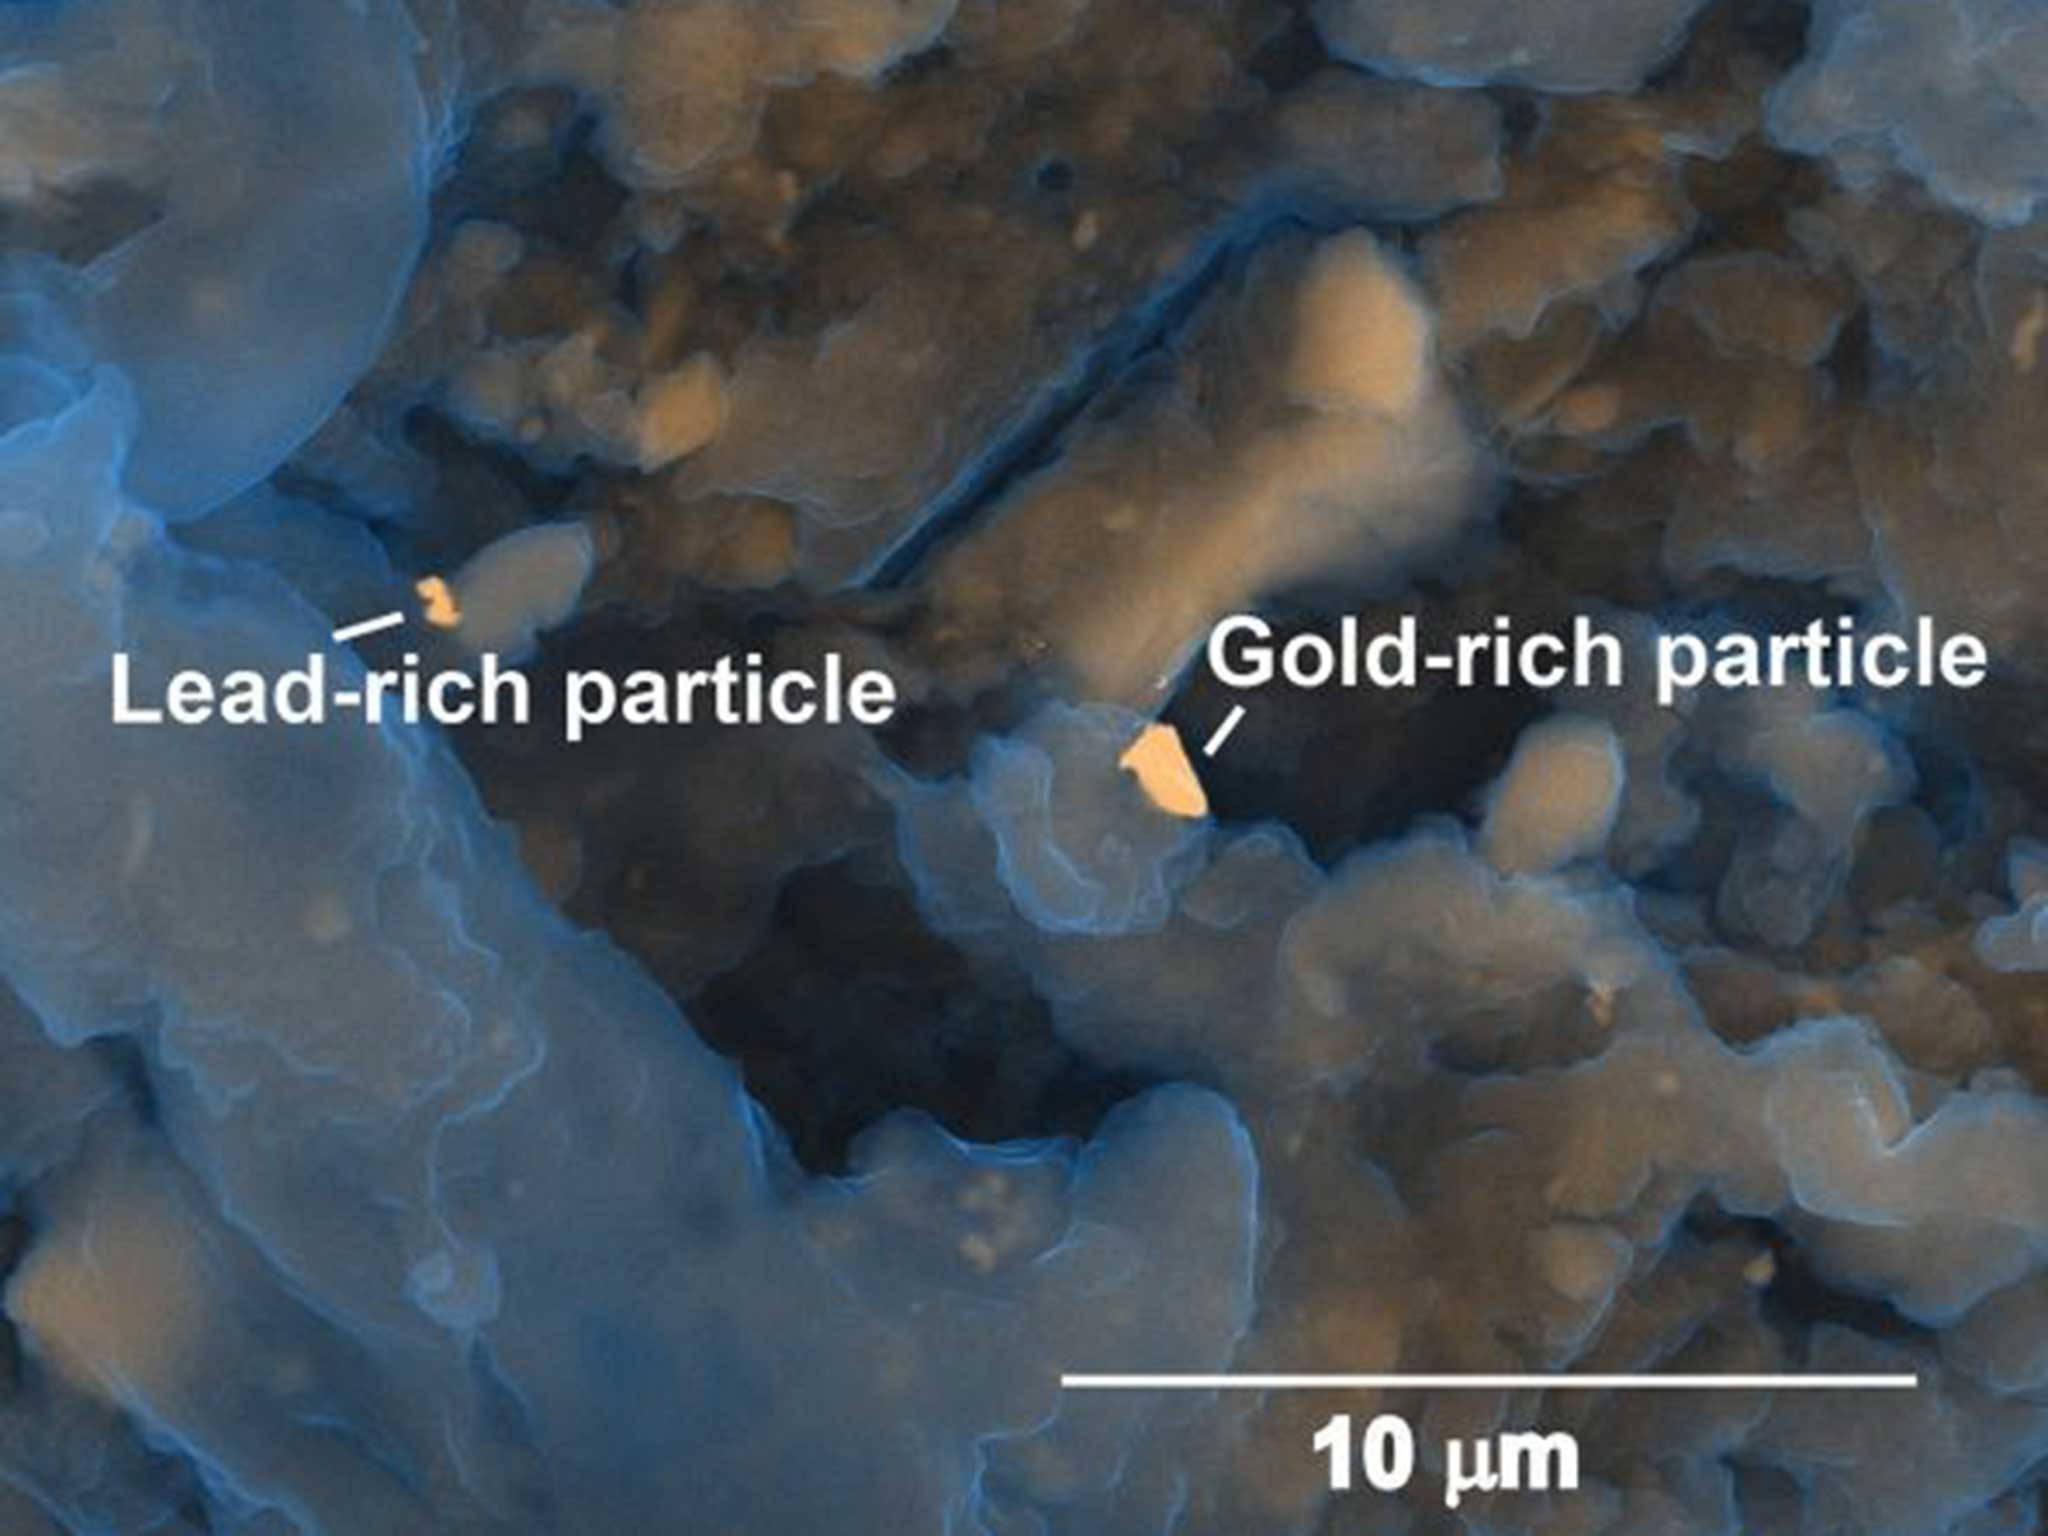 A close up of the microscopic particles found in human waste